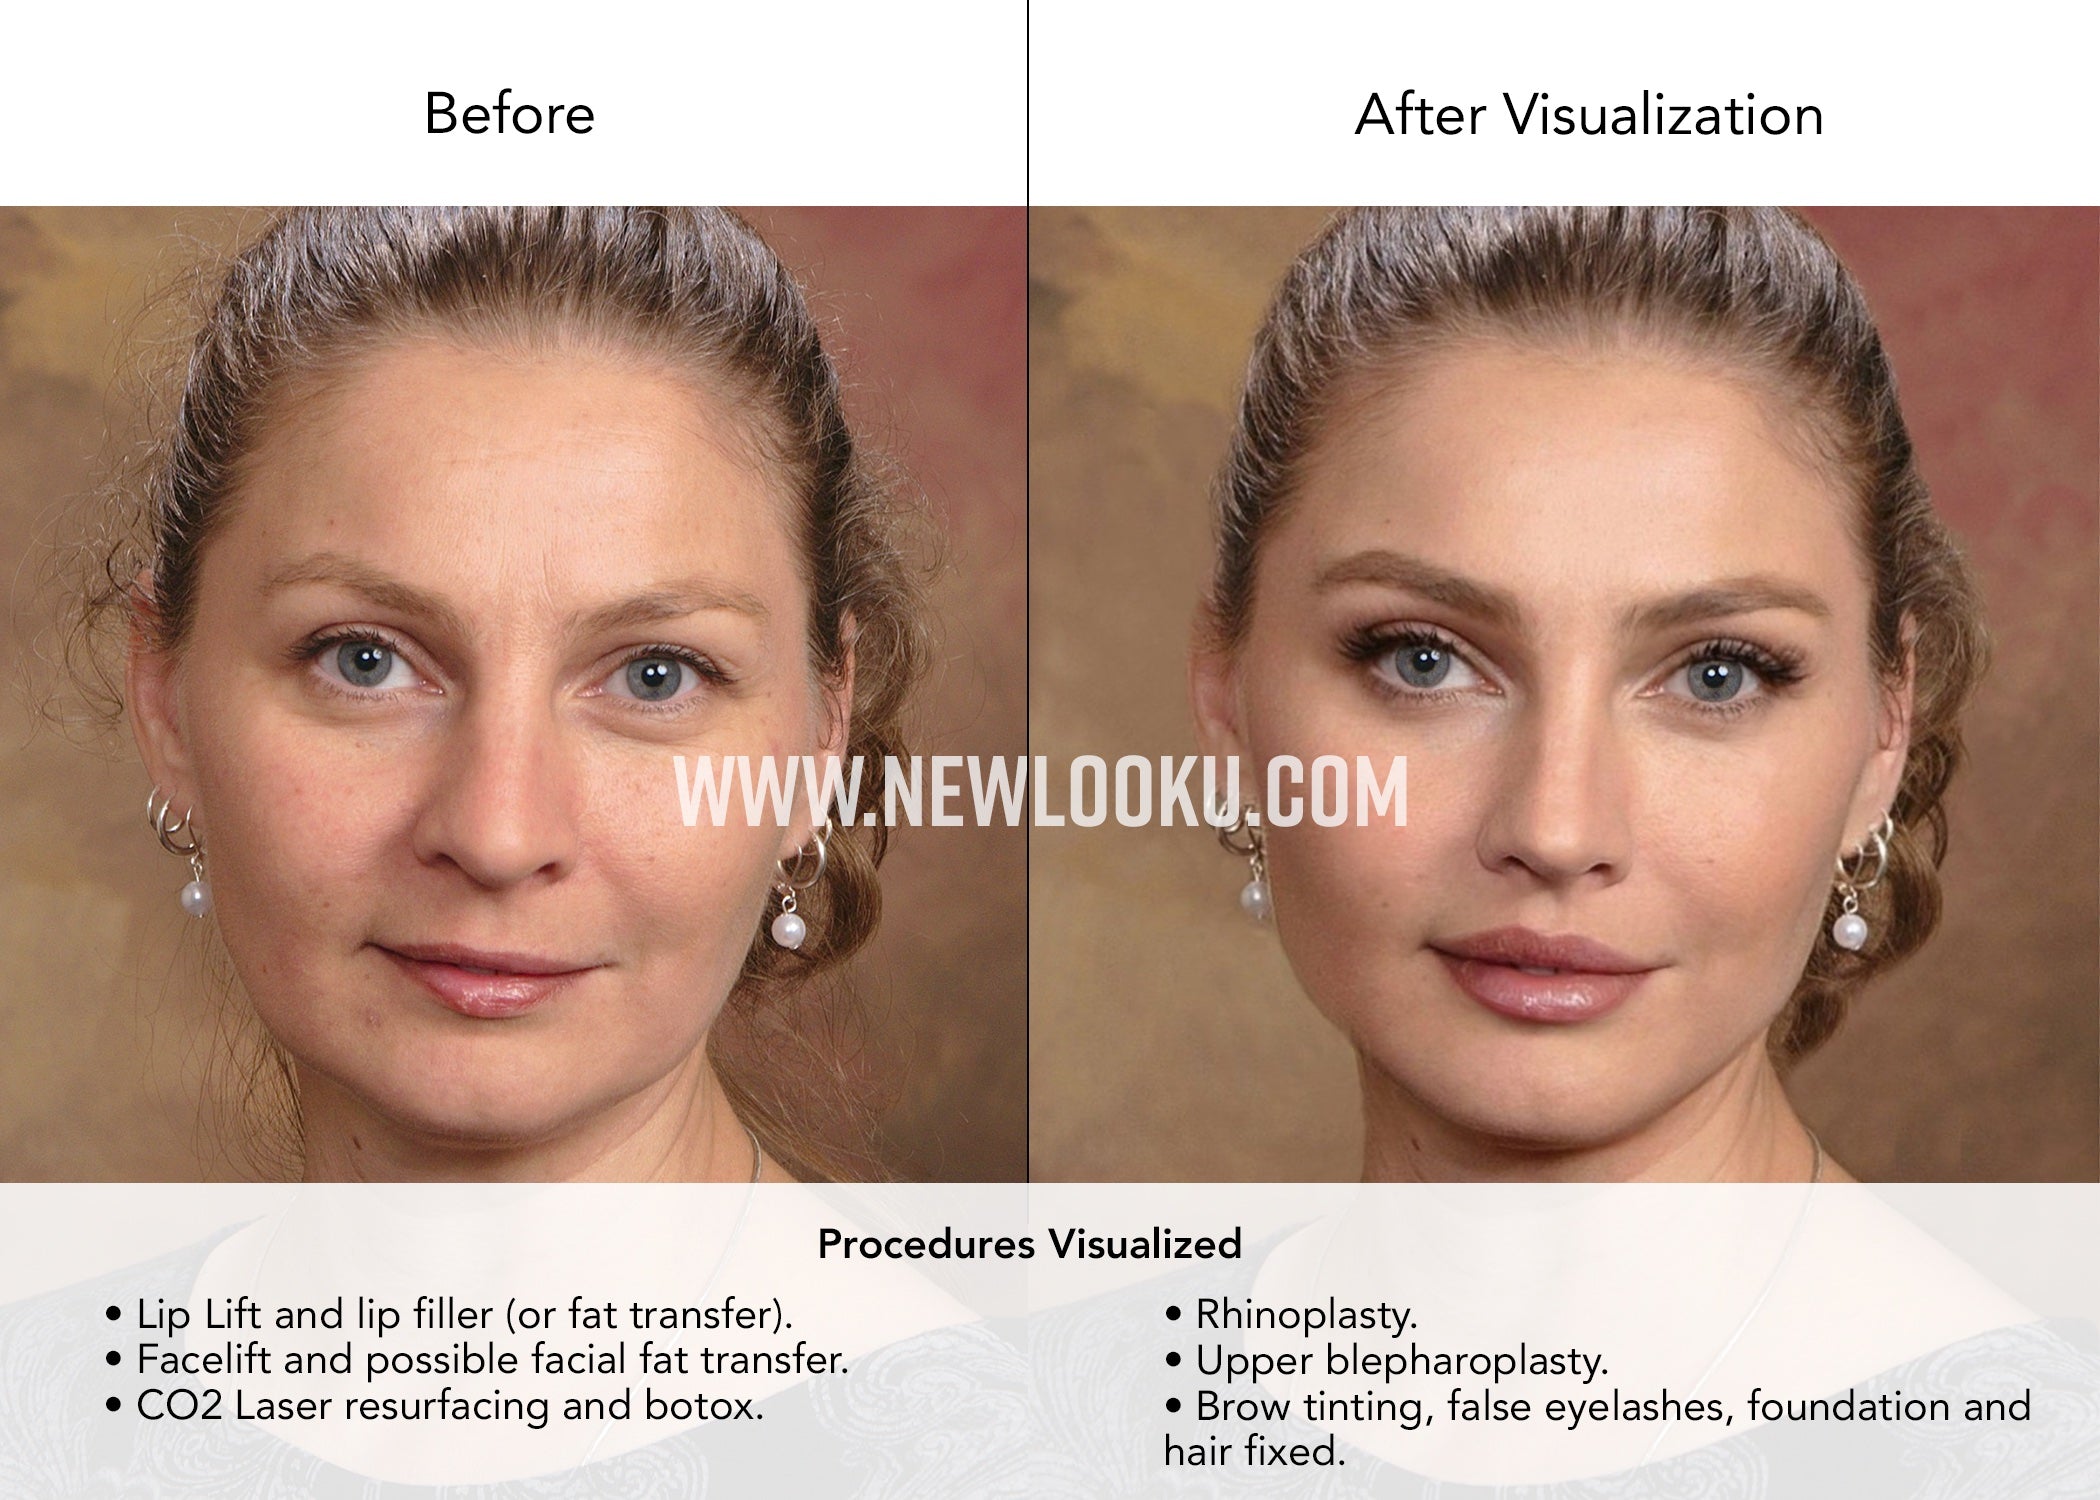 Middleaged Woman Plastic Surgery Simulation Before & After Photo.